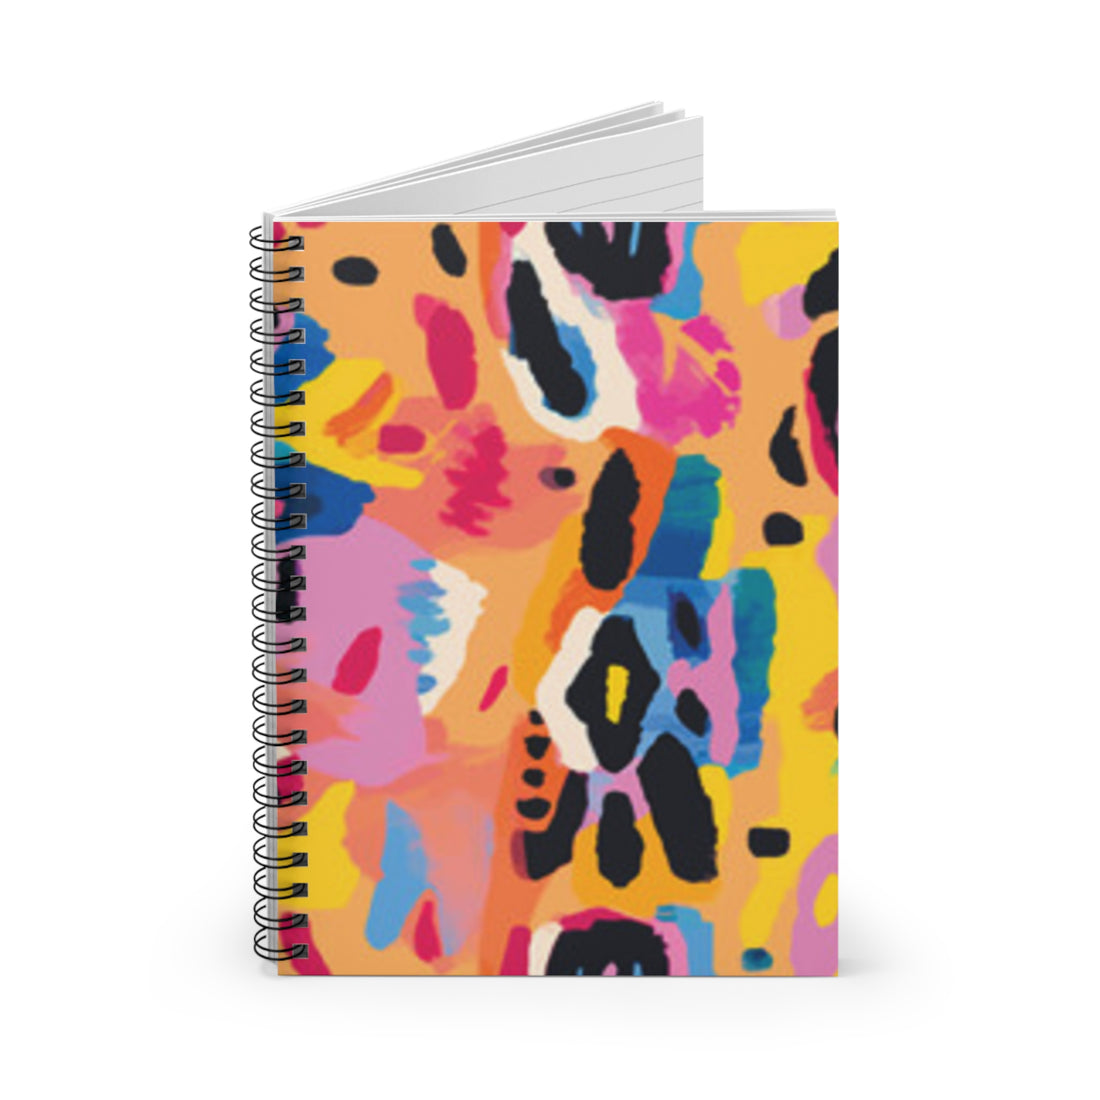 Spiral Notebook - Ruled Line colorful abstract modern bright eye catching unique journal school education stationarycover art versatile use school supplies